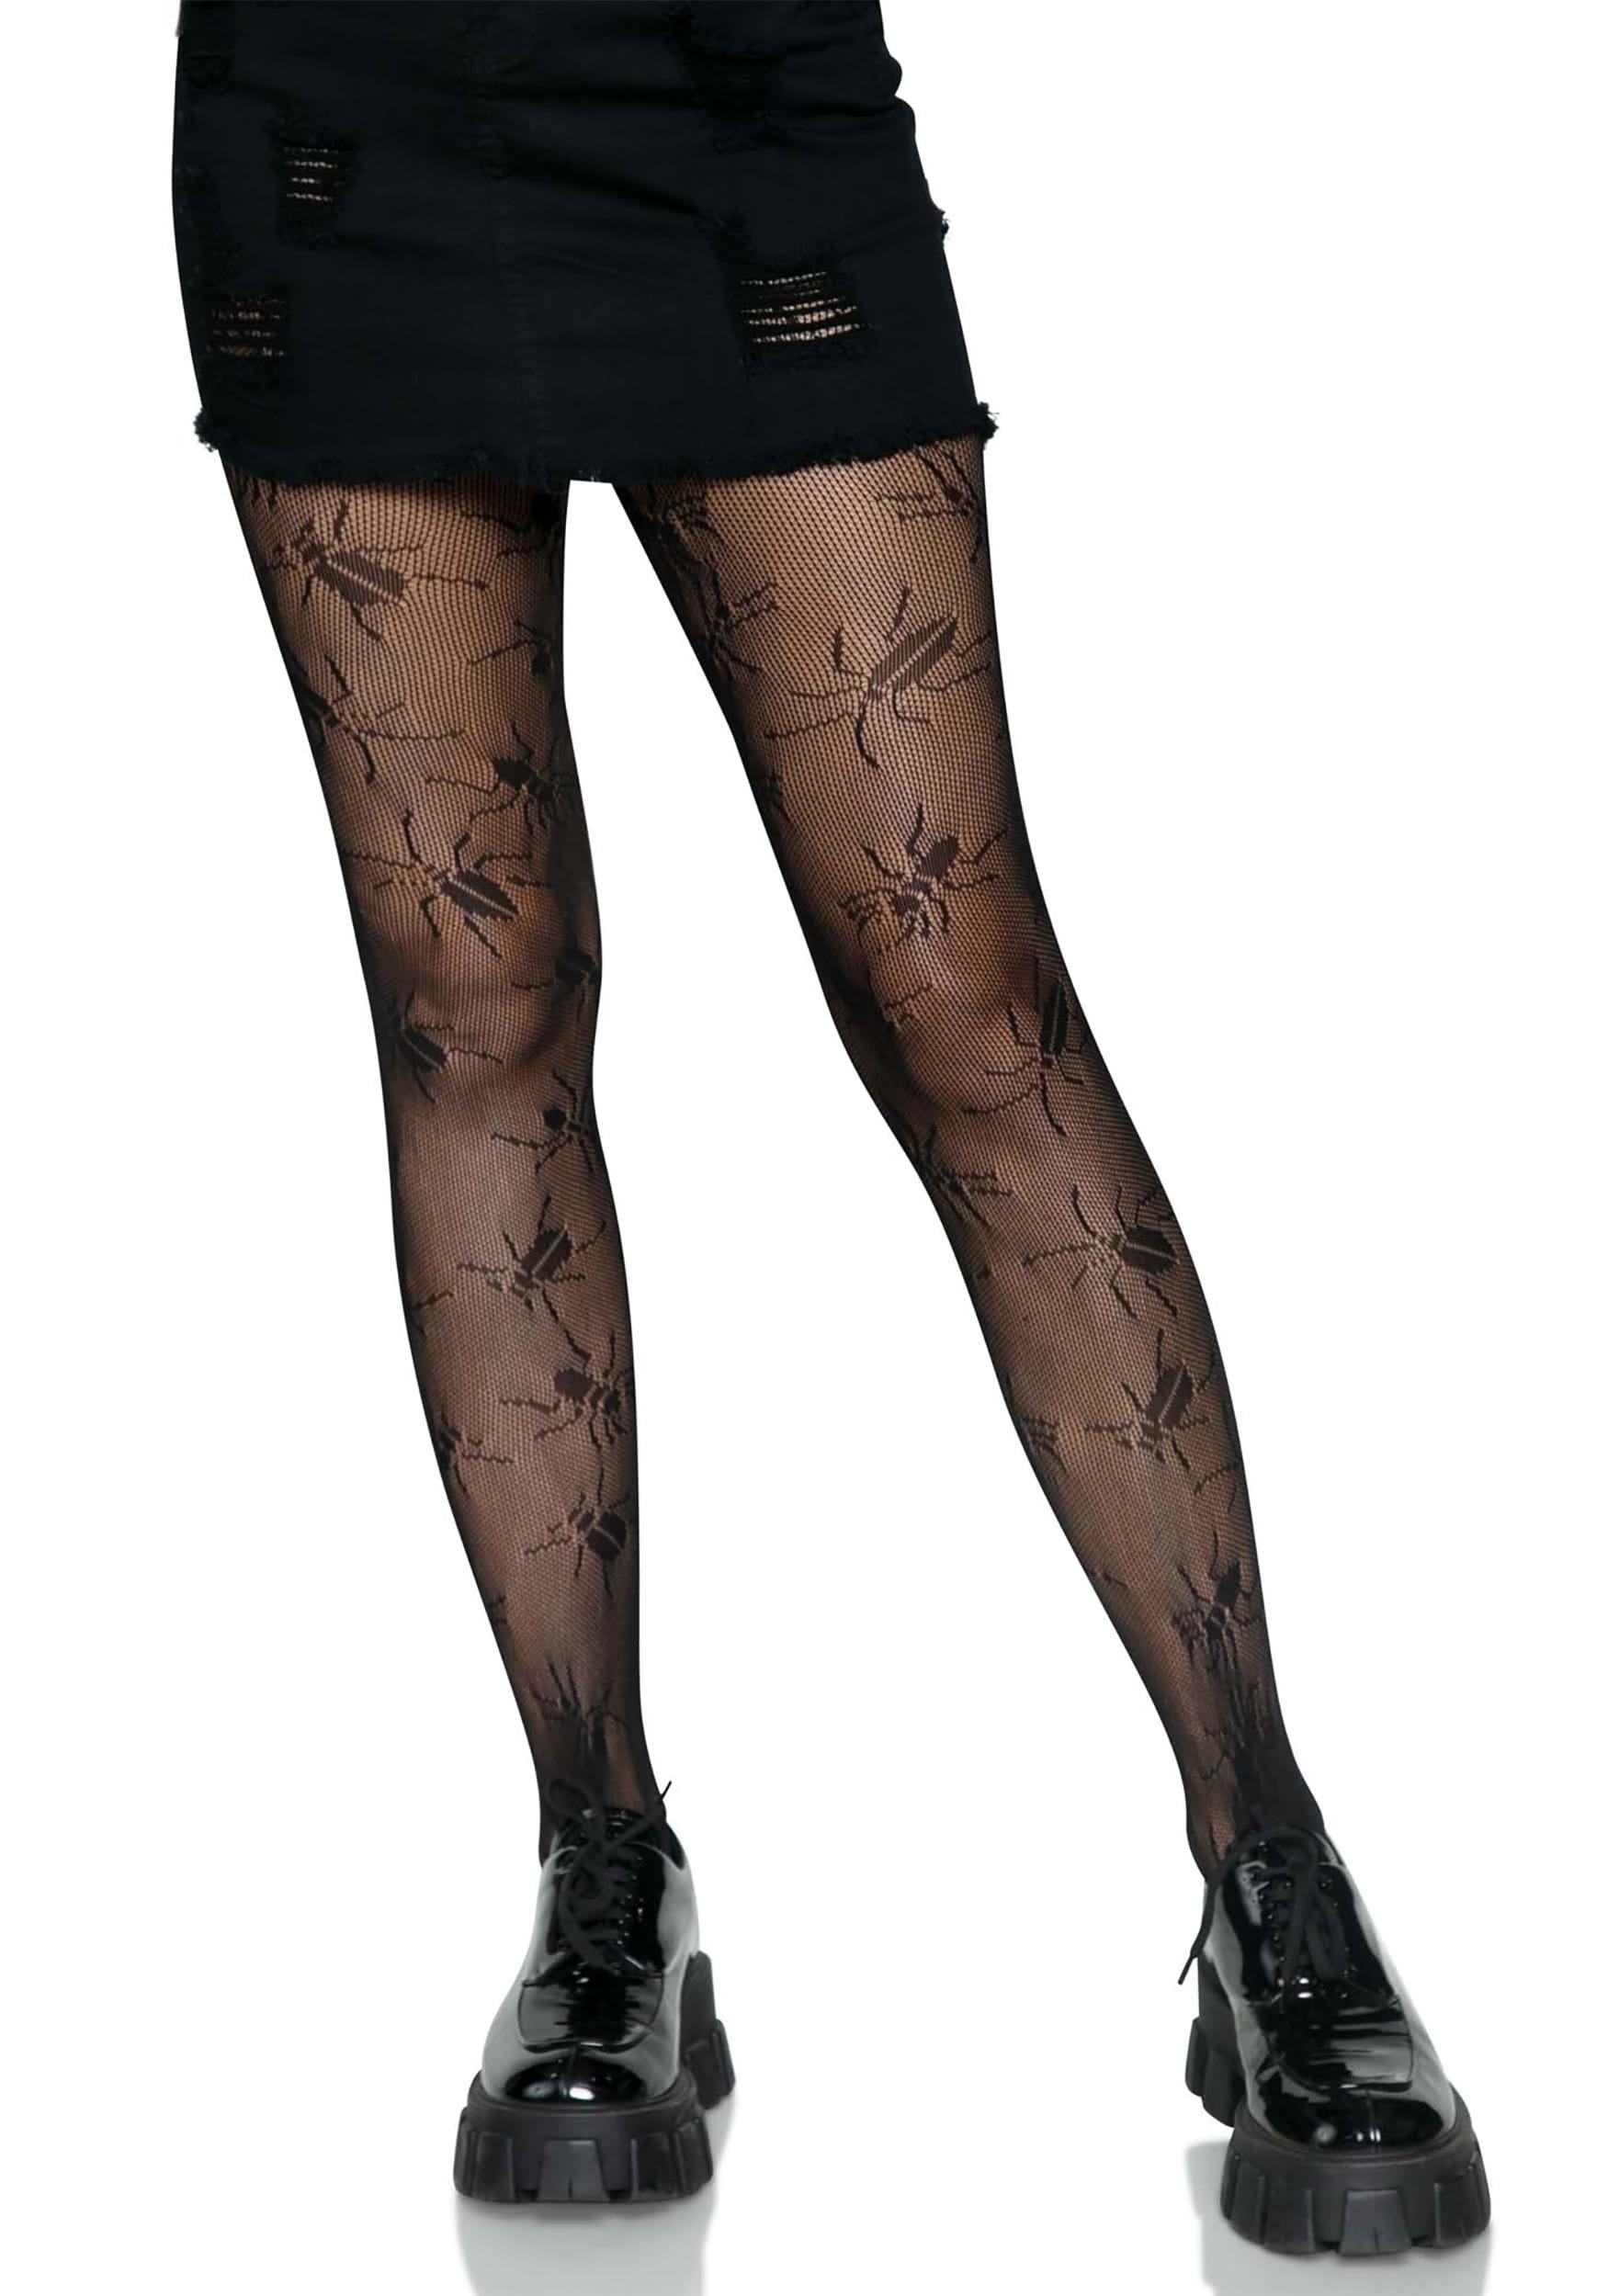 https://images.halloweencostumes.ca/products/82976/1-1/beetle-net-tights.jpg